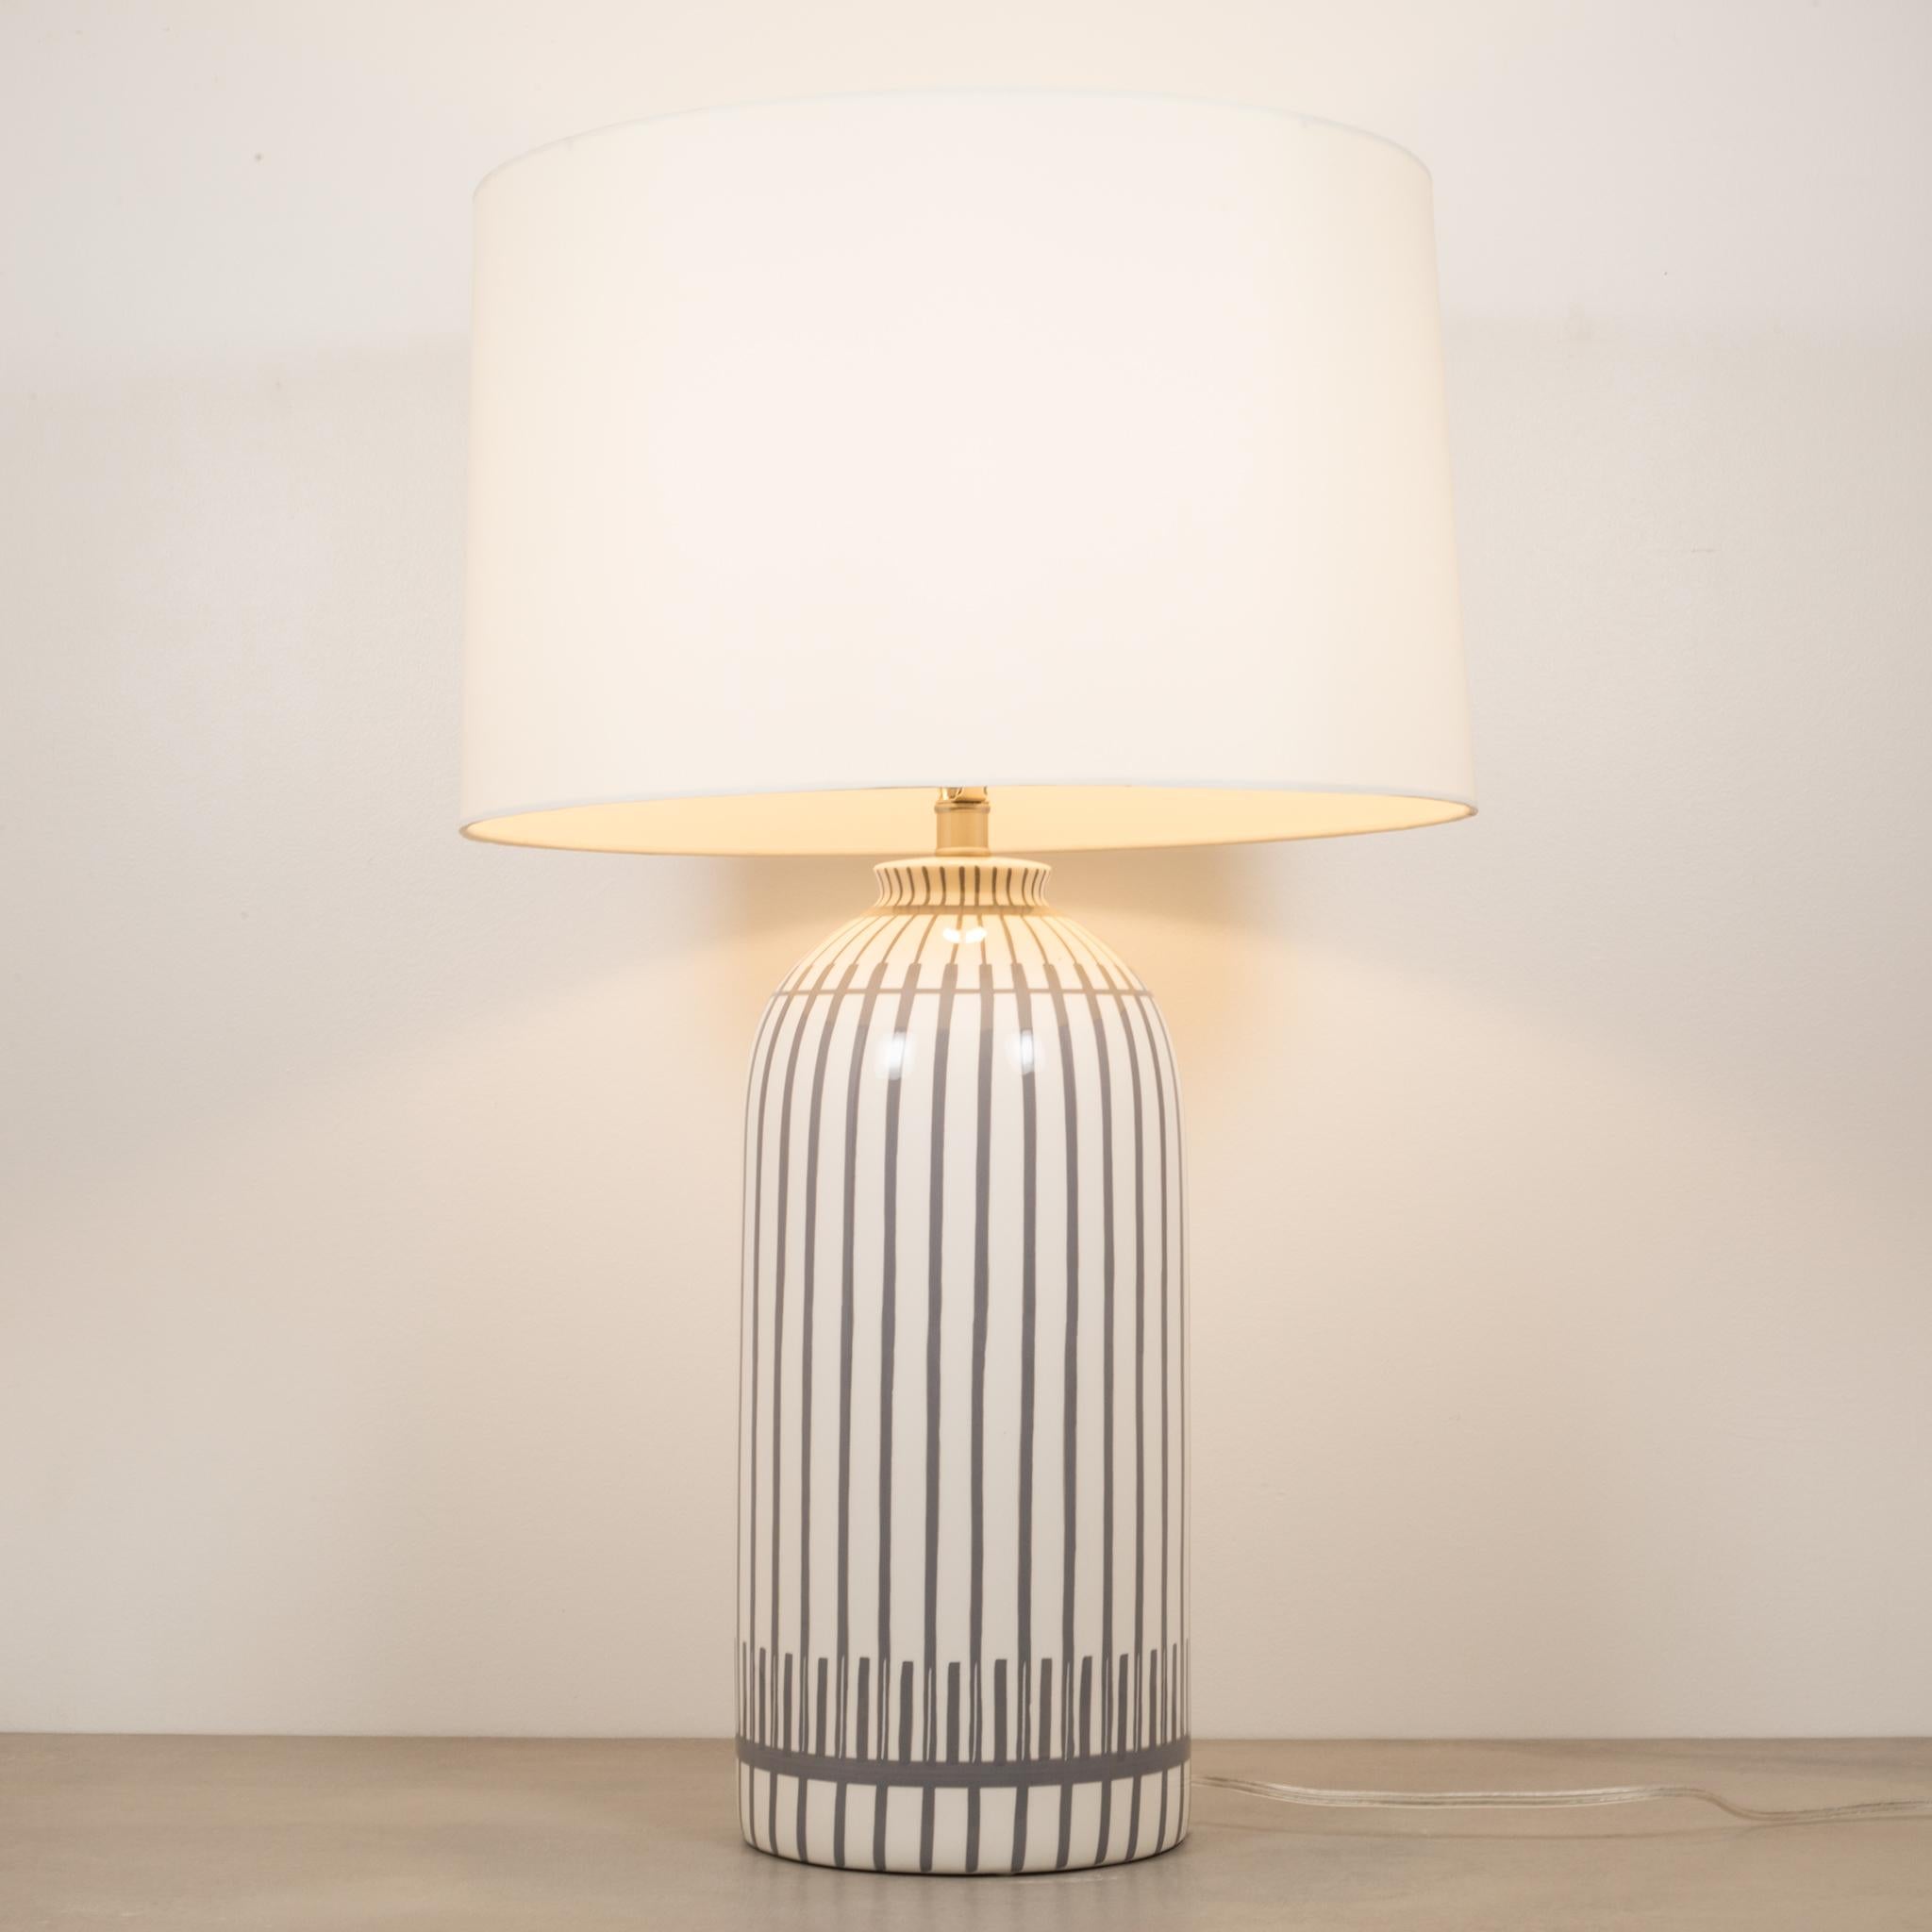 About

The Hoover Lamp is a subtle artisan work of art. The porcelain Hoover becomes functional art with its white and dove gray finish, hand painted patterns that evoke a sense of warmth and comfort. Topped with an ivory microfiber drum shade and